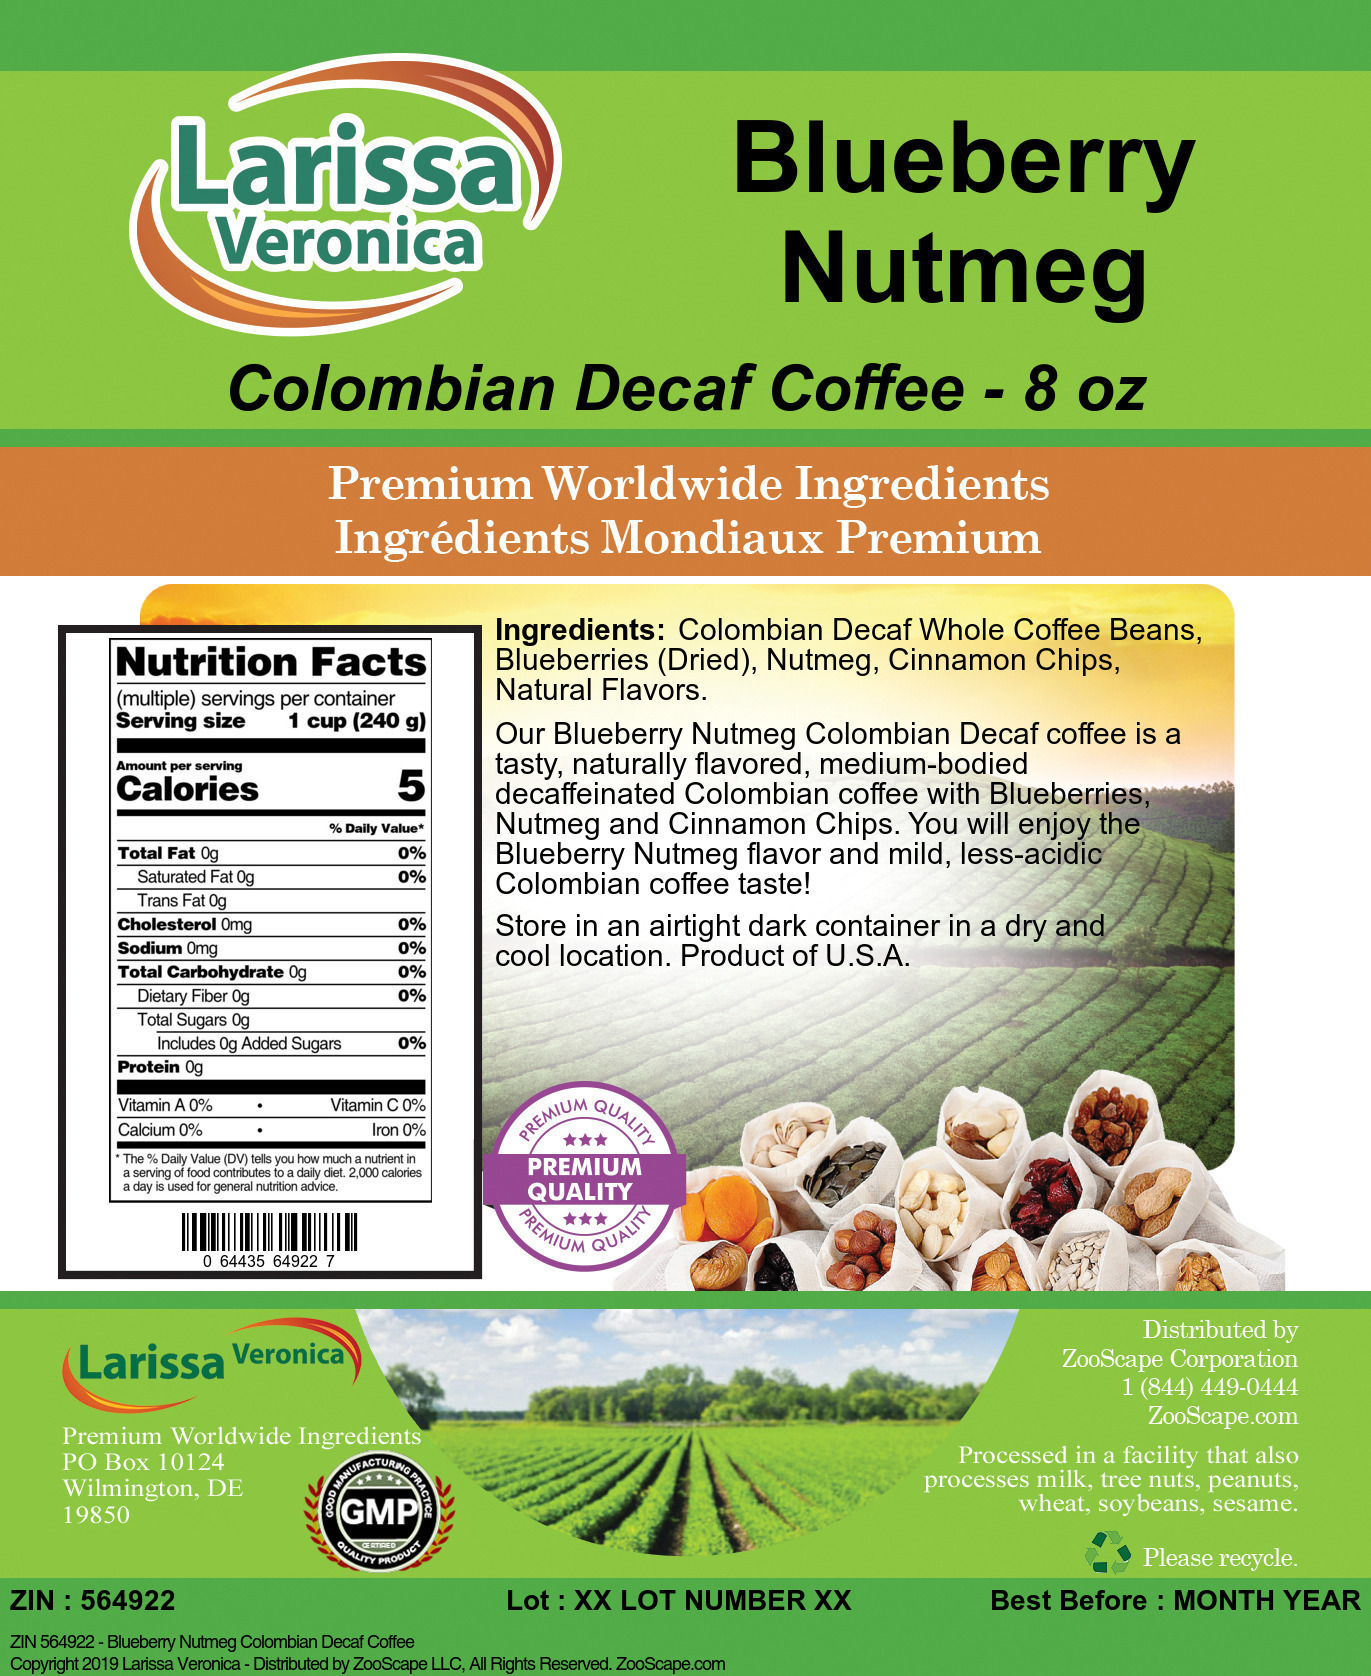 Blueberry Nutmeg Colombian Decaf Coffee - Label